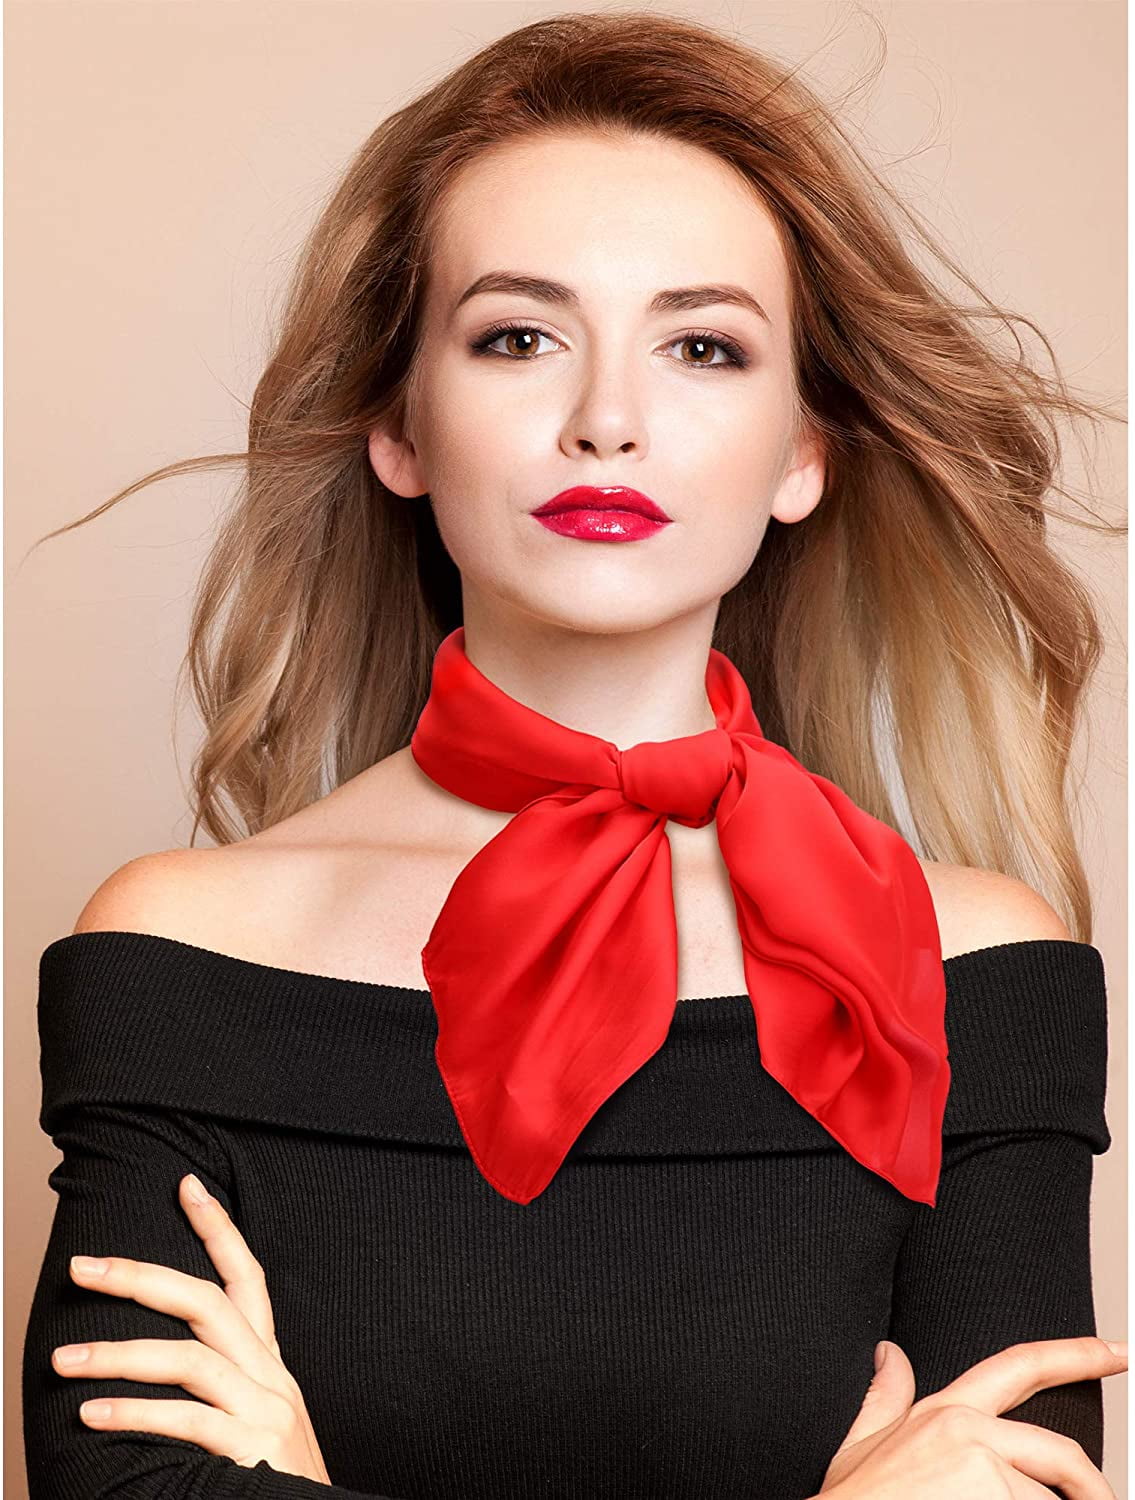 Satinior Chiffon Scarf Wholesale Square Printed Handkerchief For Head With  Satin Ribbon For Women, Girls, And Ladies Perfect Christmas Gift From  Huaishu33, $56.64